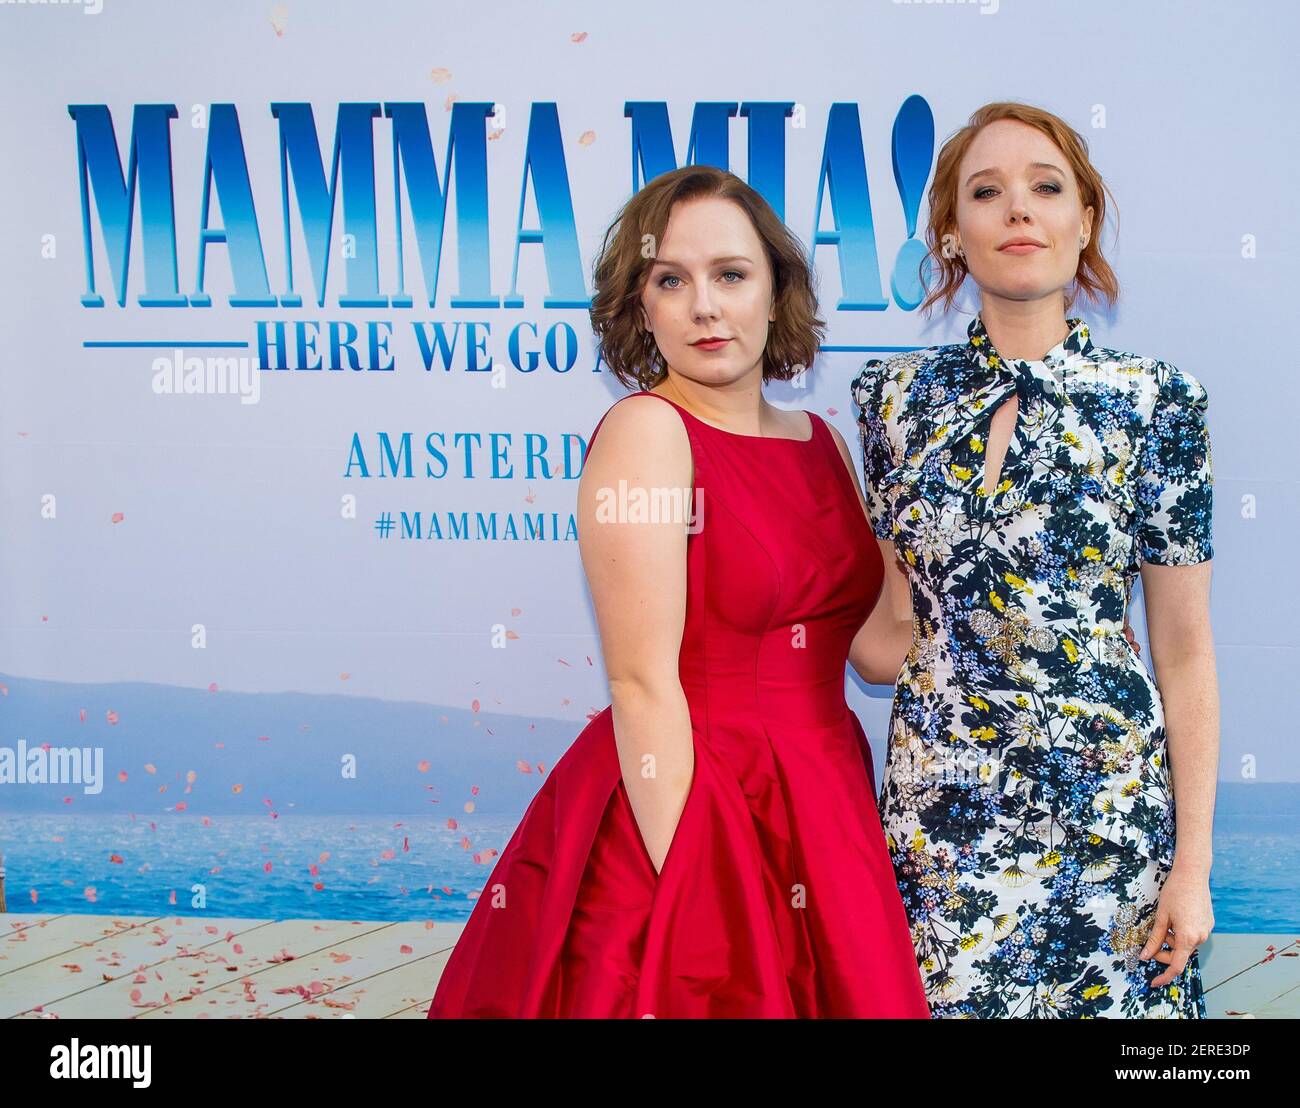 Alexa Davies and Jessica Keenan Wynn on the red carpet during the premiere  of movie Mamma Mia! Here We Go Again at Tuschinski Theater in Amsterdam,  The Netherlands. (Photo by DPPA/Sipa USA